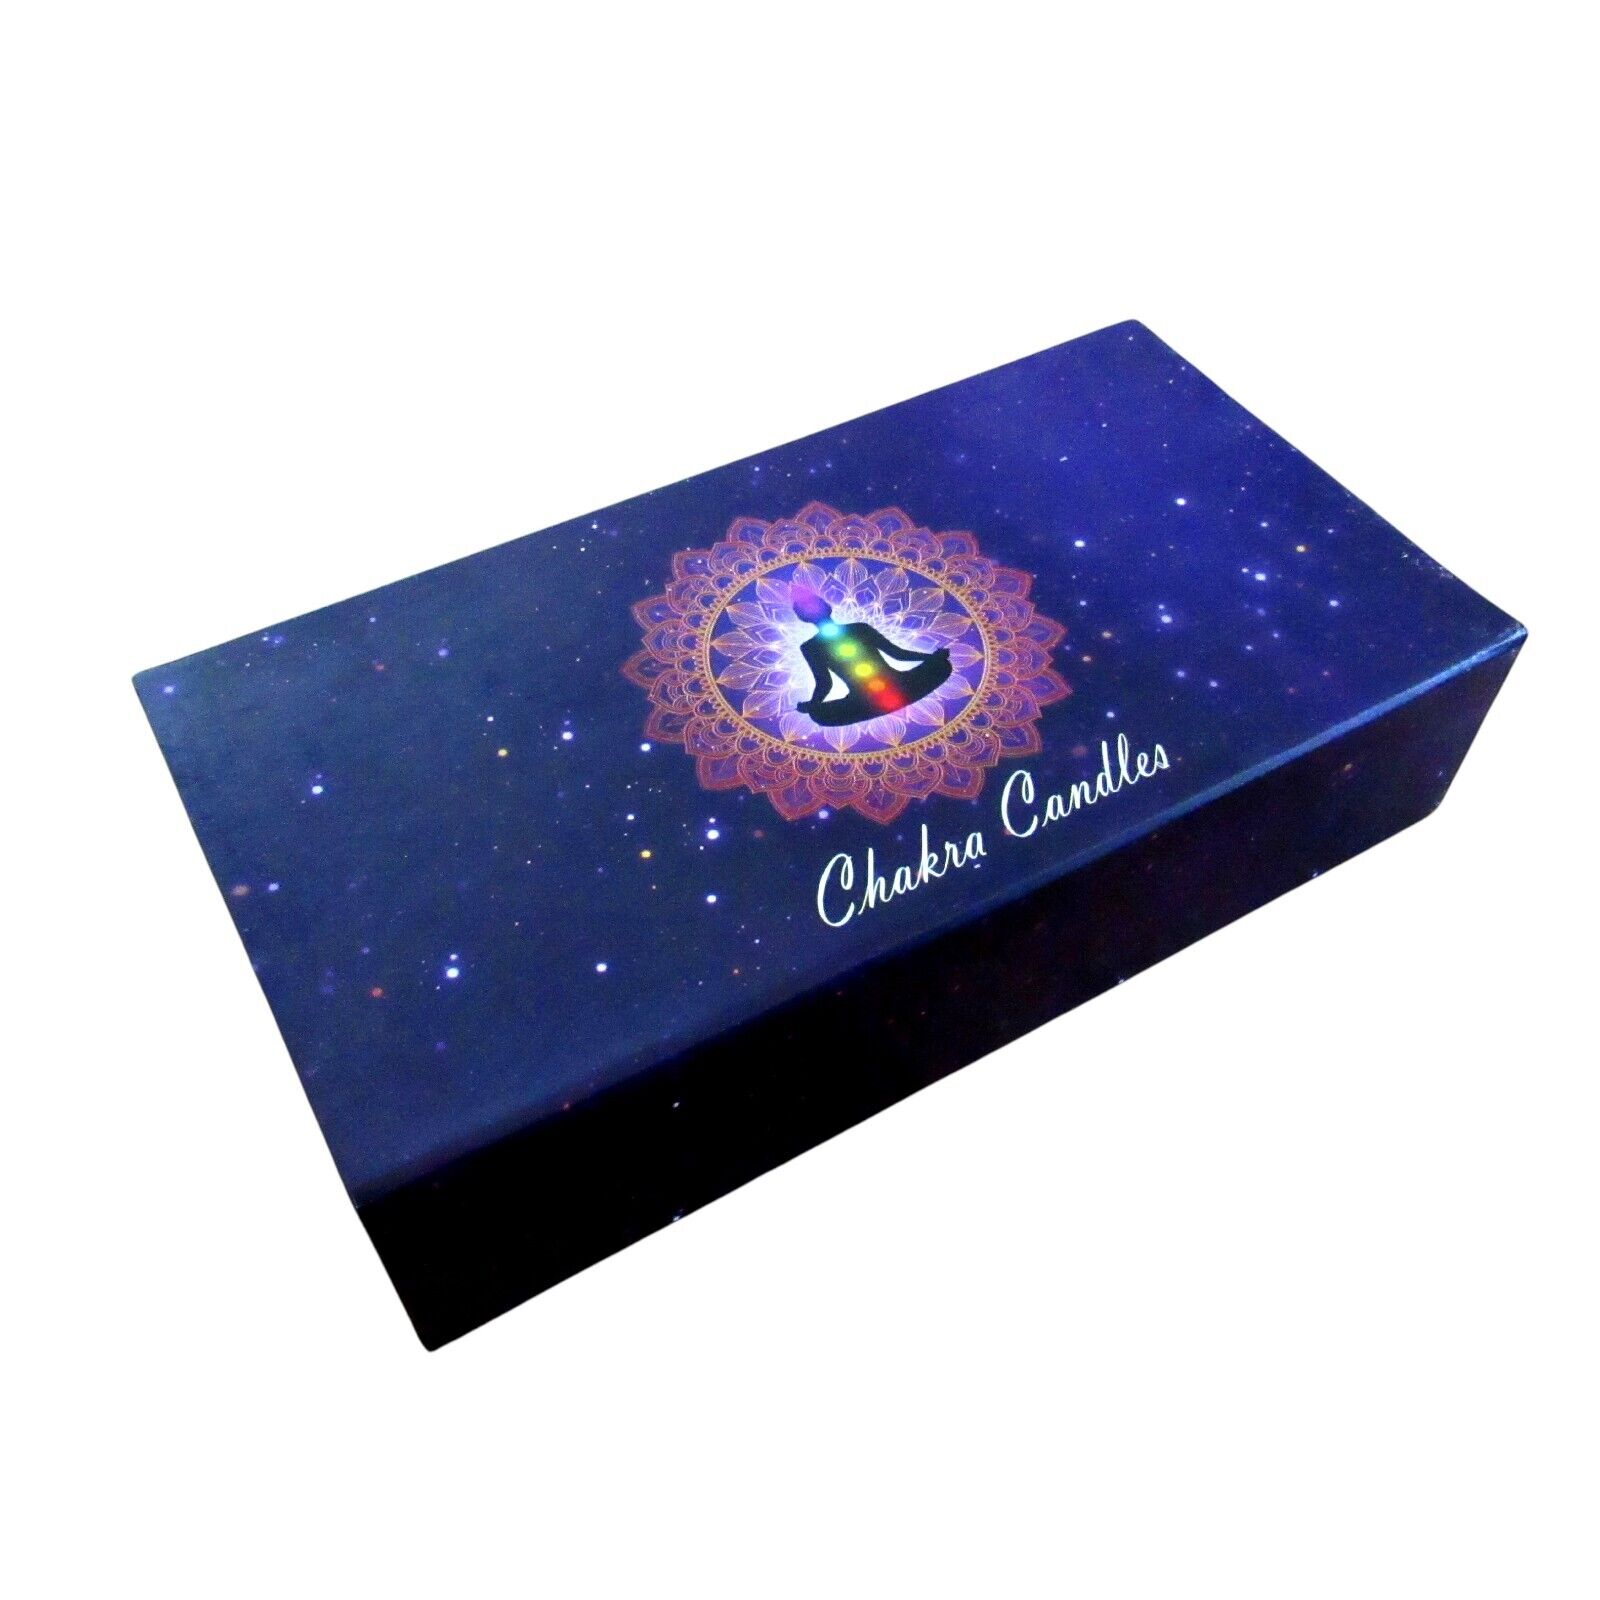 Chakra Candle Set with Gift Box, 7 Glass Votive Candles for Meditation / Yoga